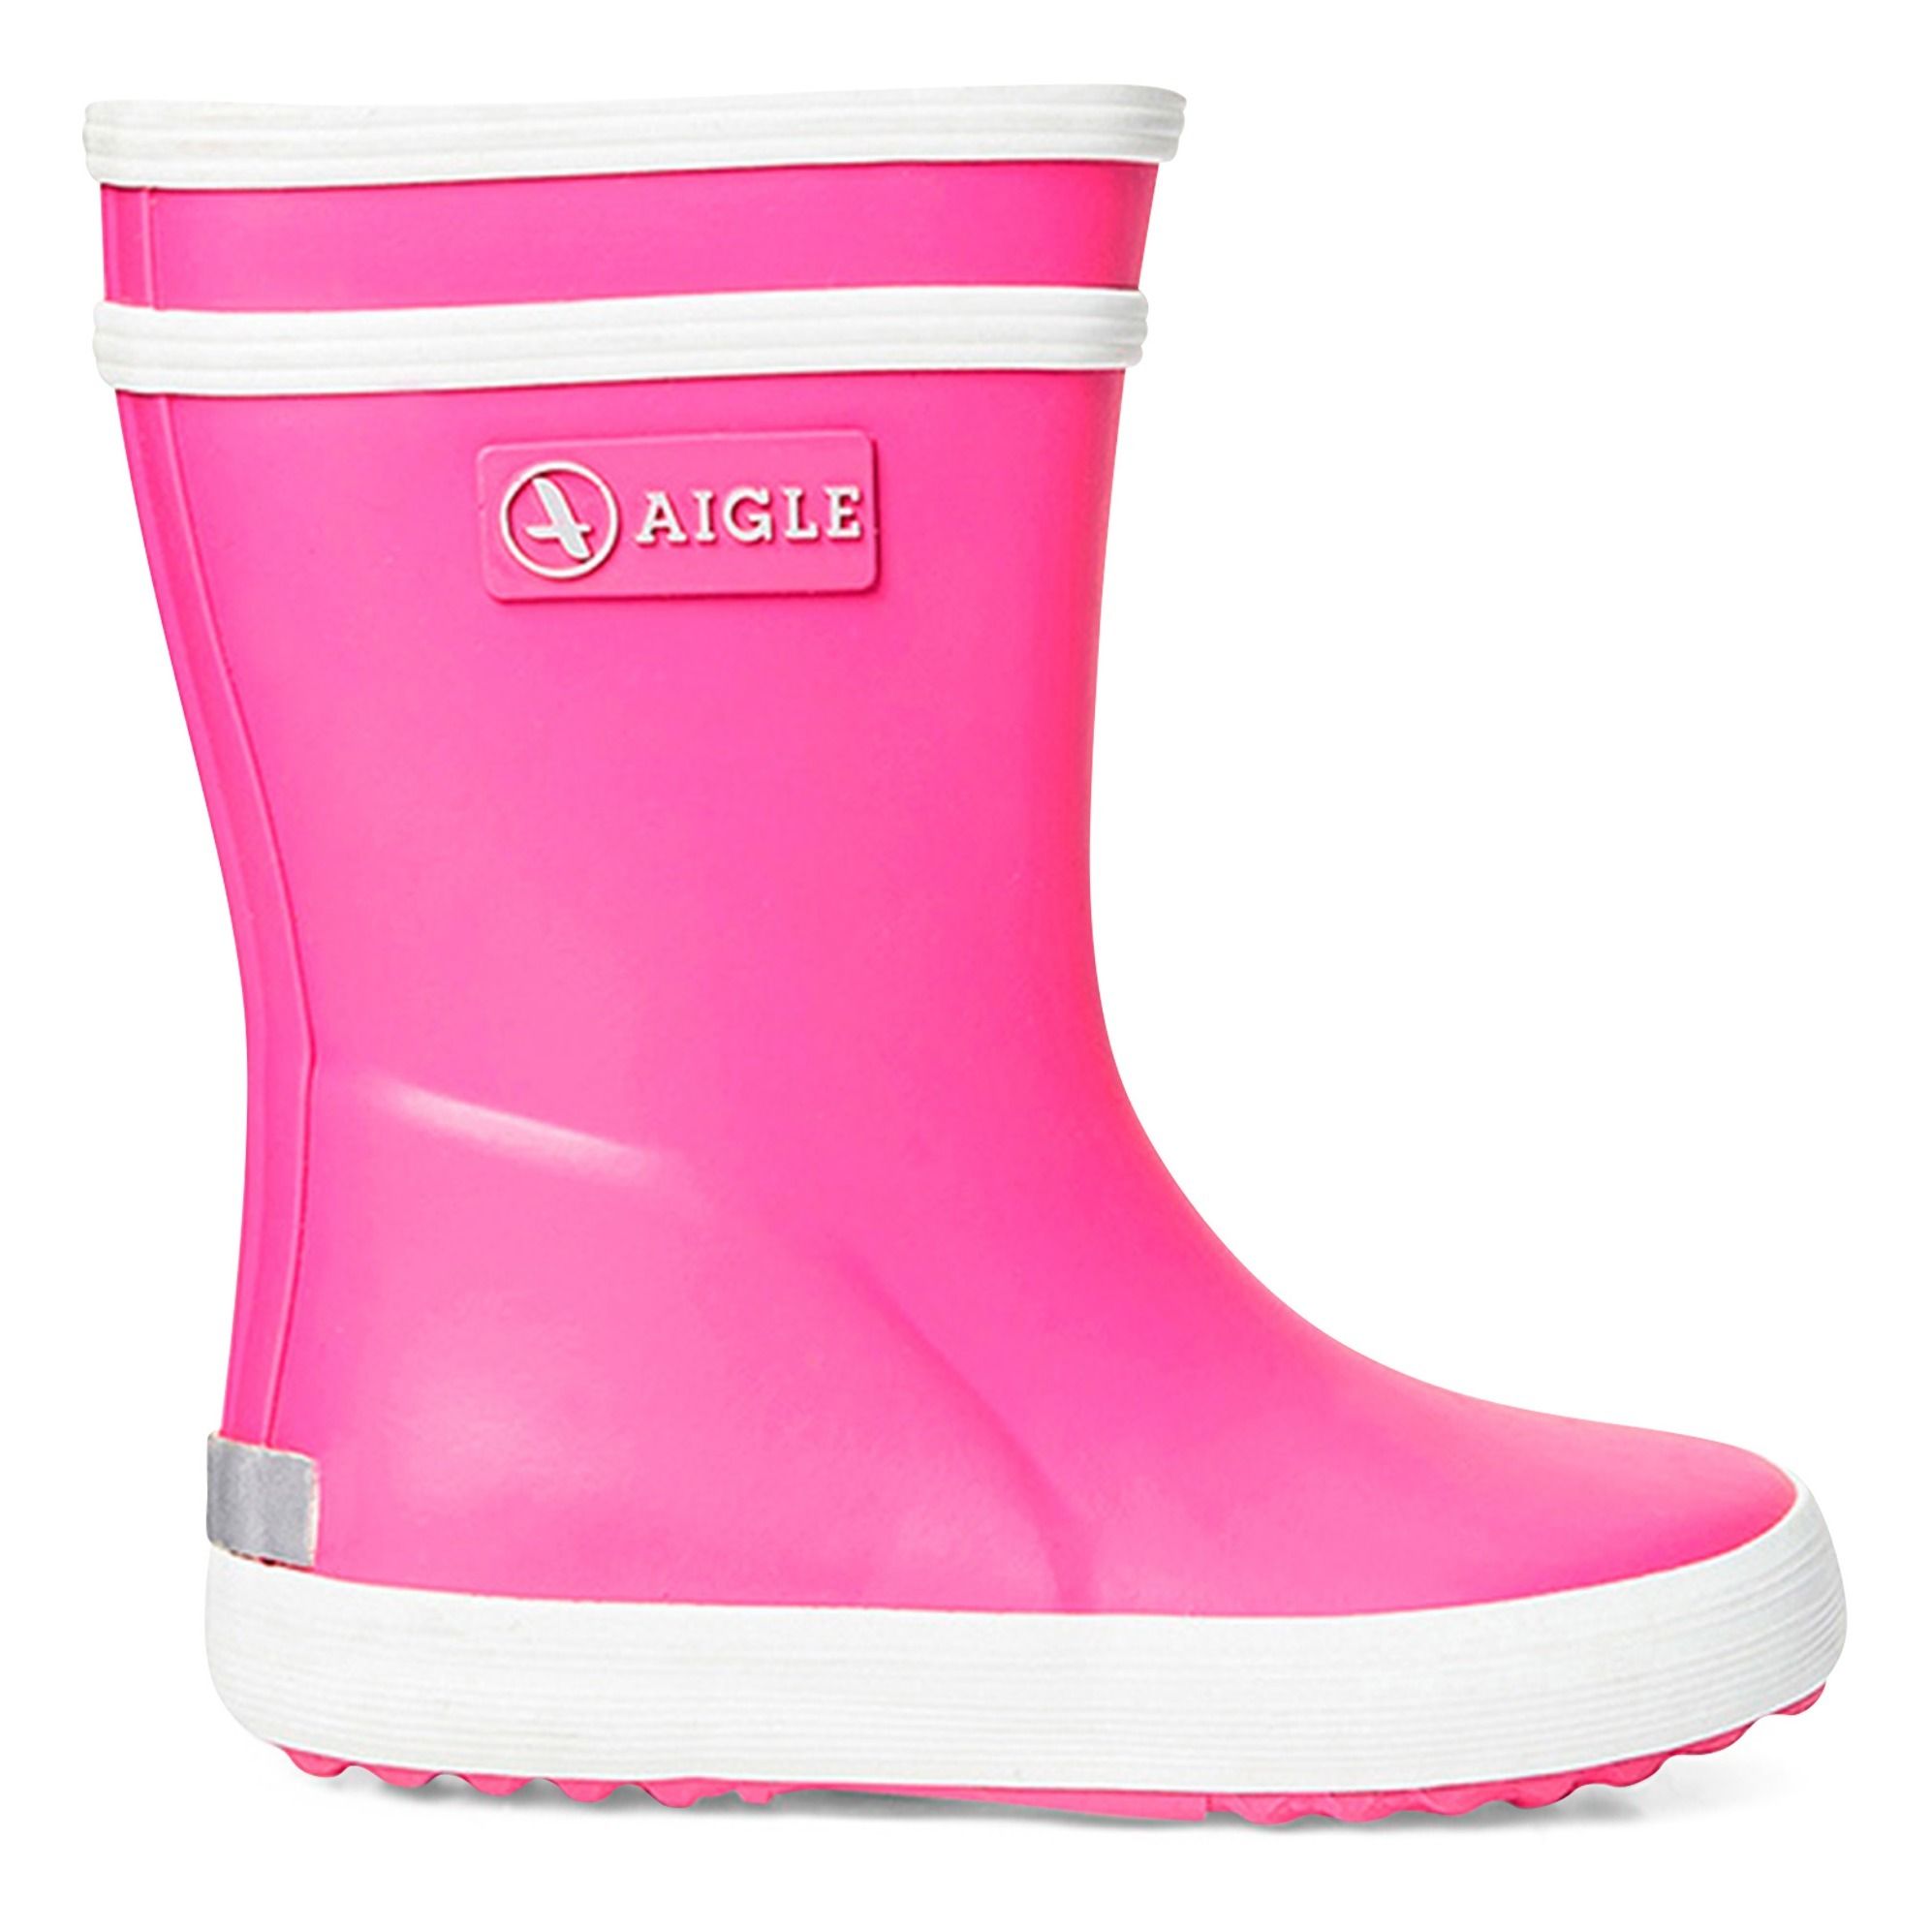 Baby Flac rainboots Pink Aigle Shoes 